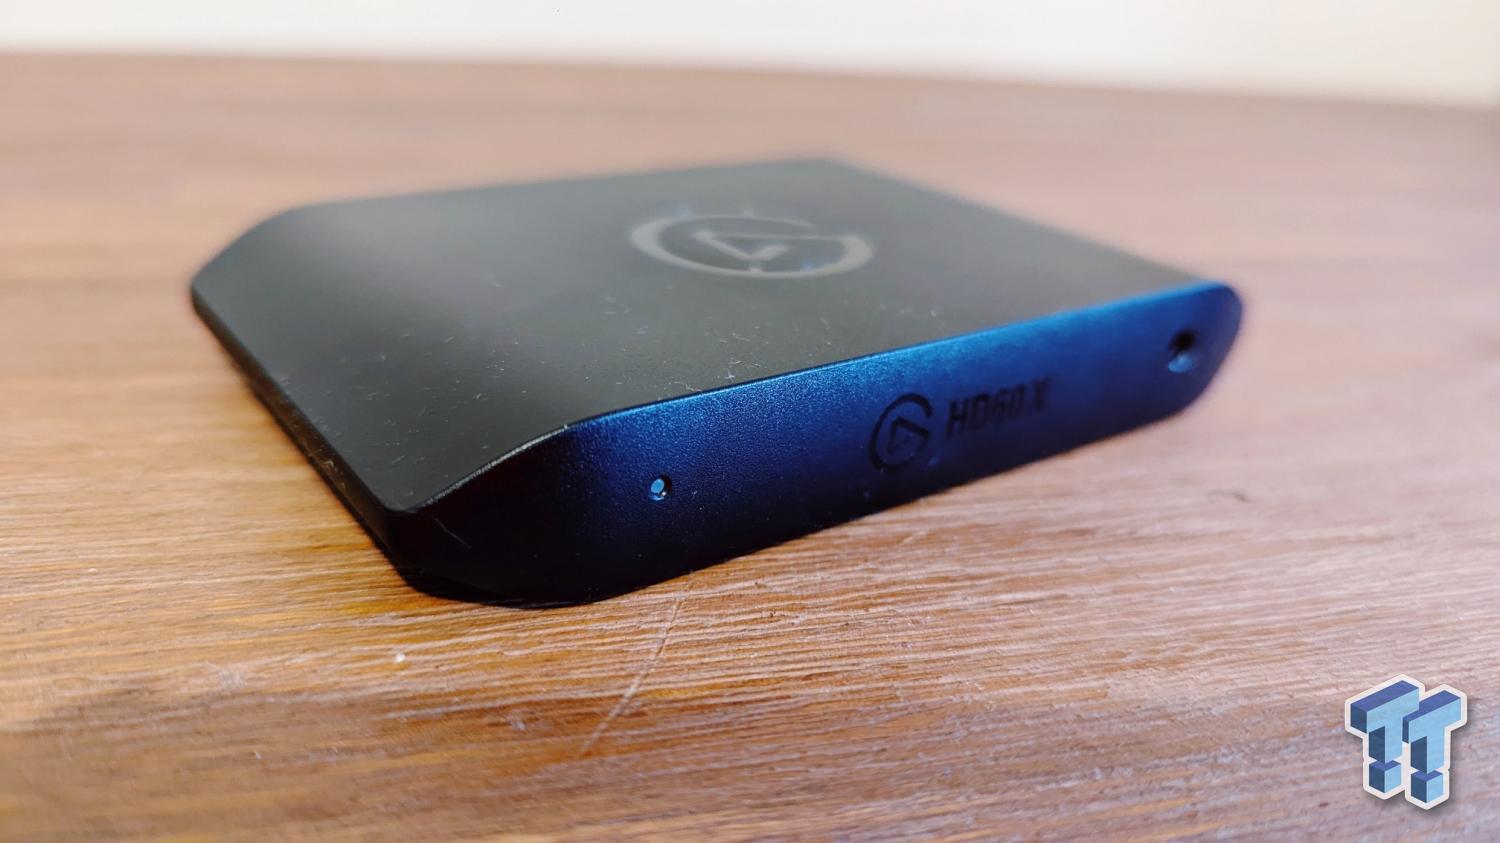 Gadget Review: Elgato HD60 X – Digitally Downloaded